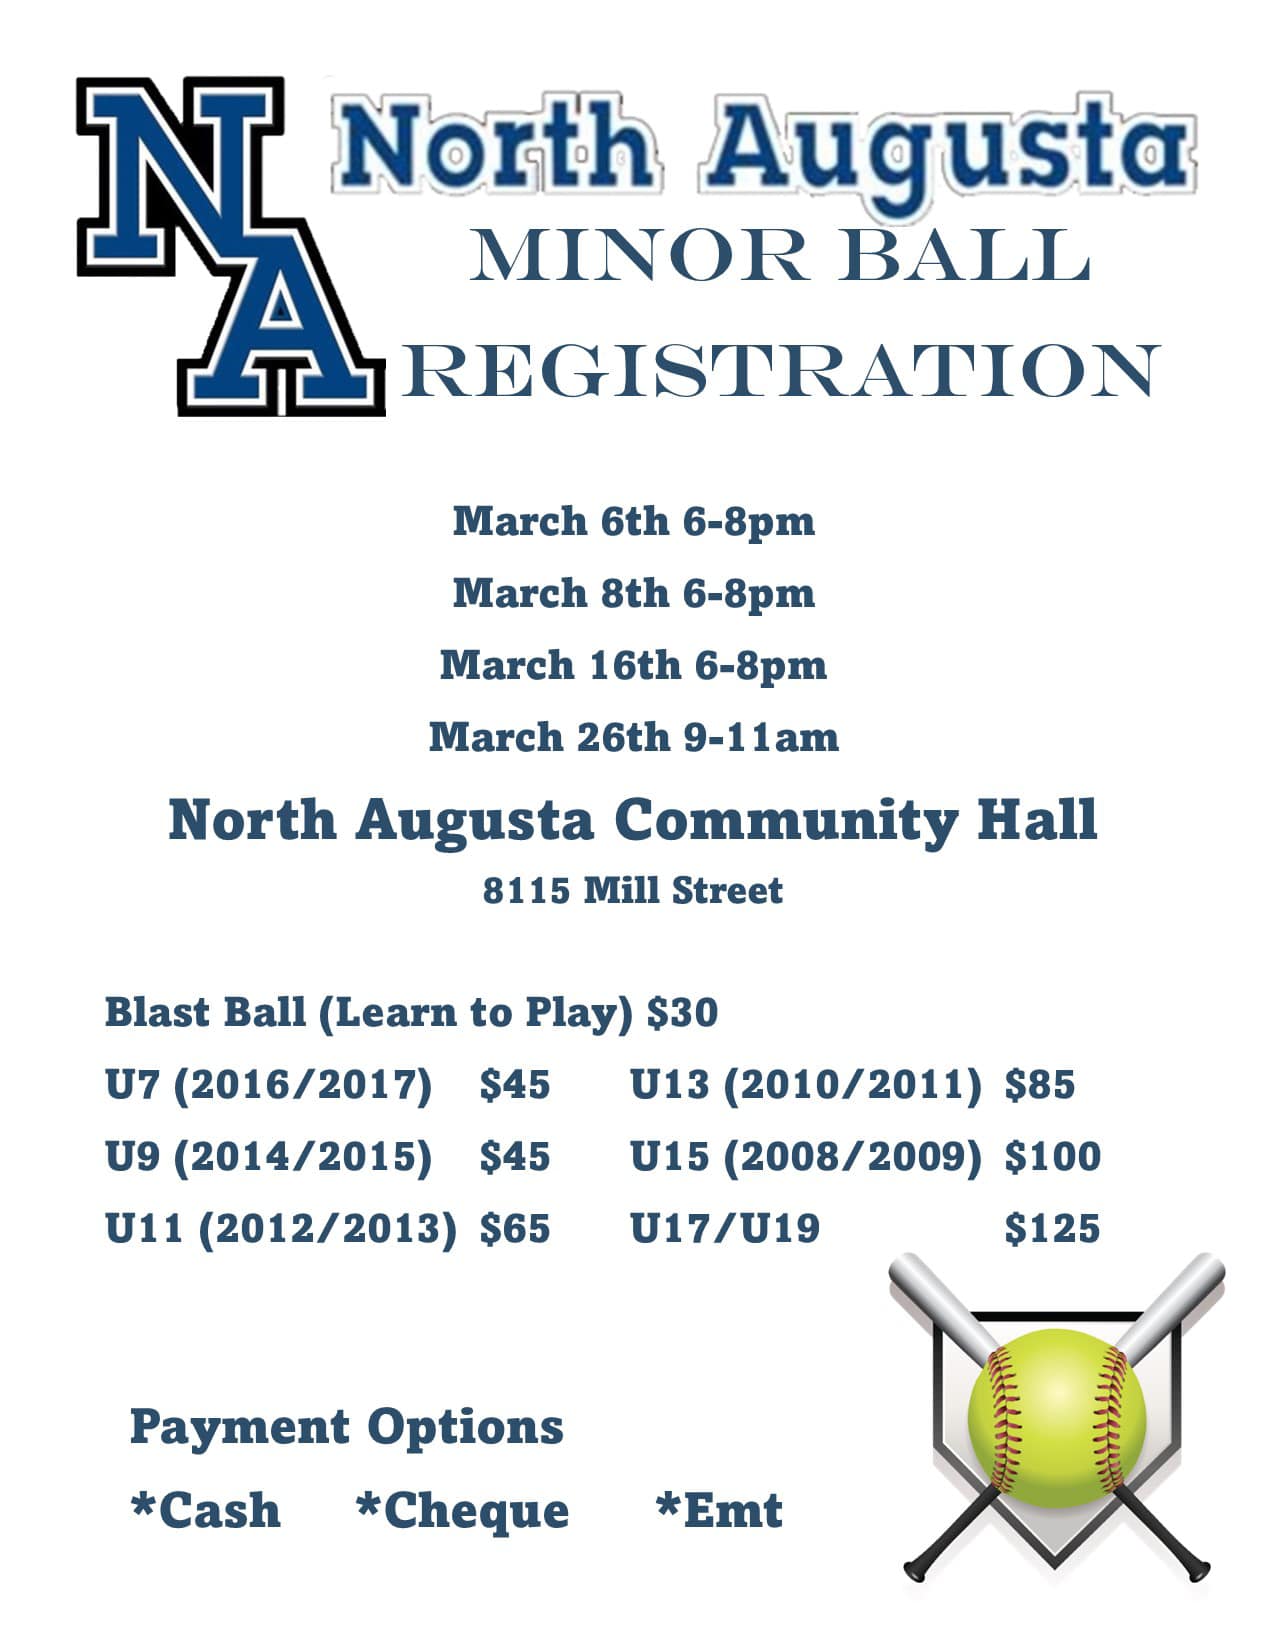 north augusta minor ball registration flyer - march 6, 8, 16 from 6-8pm. March 26 from 9-11am